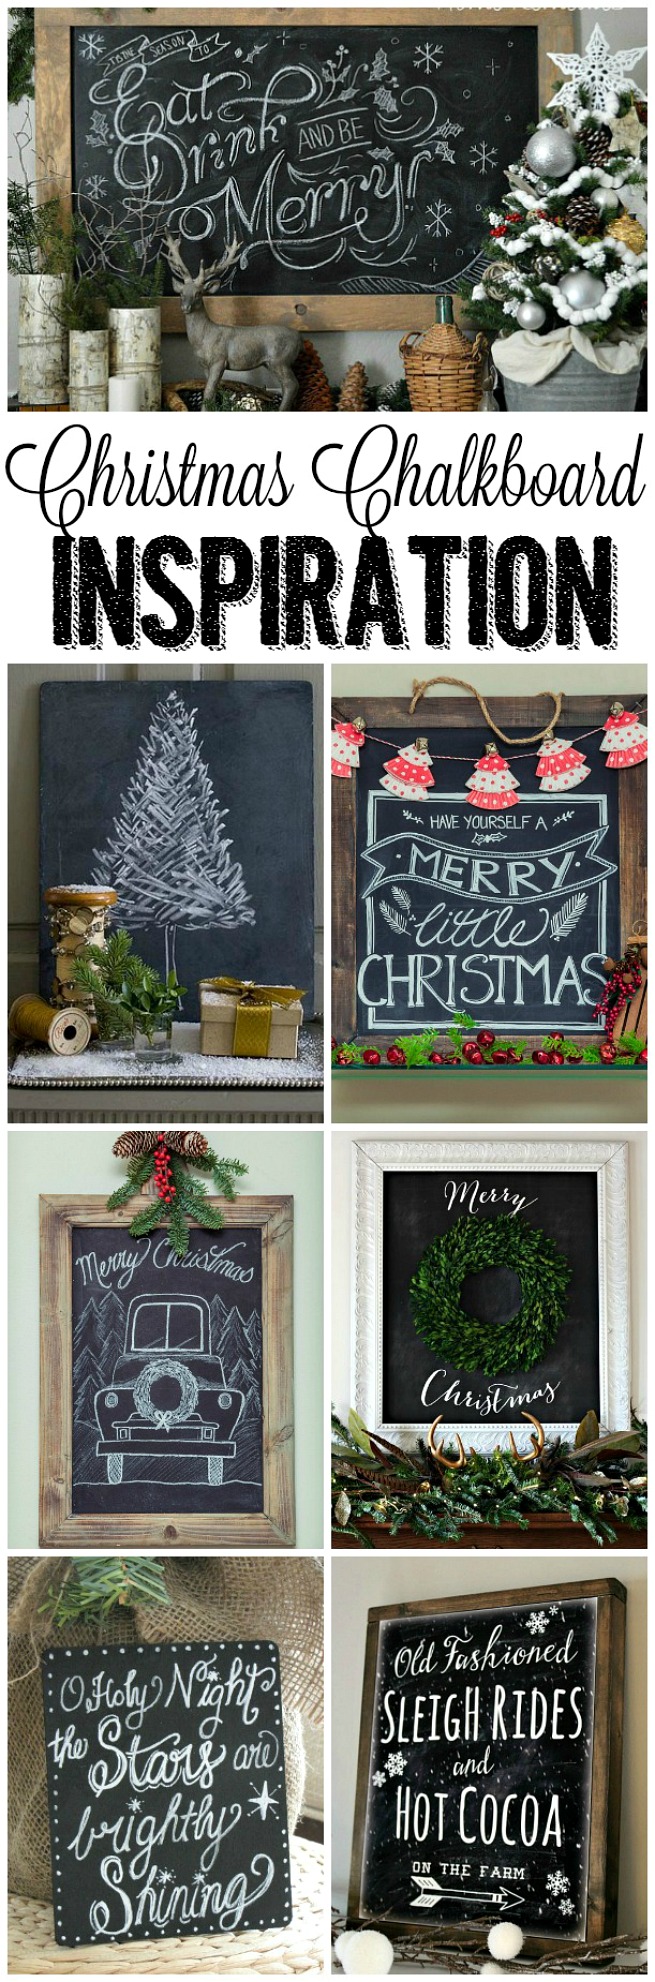 Beautiful Christmas chalkboard ideas to create the perfect holiday decor!